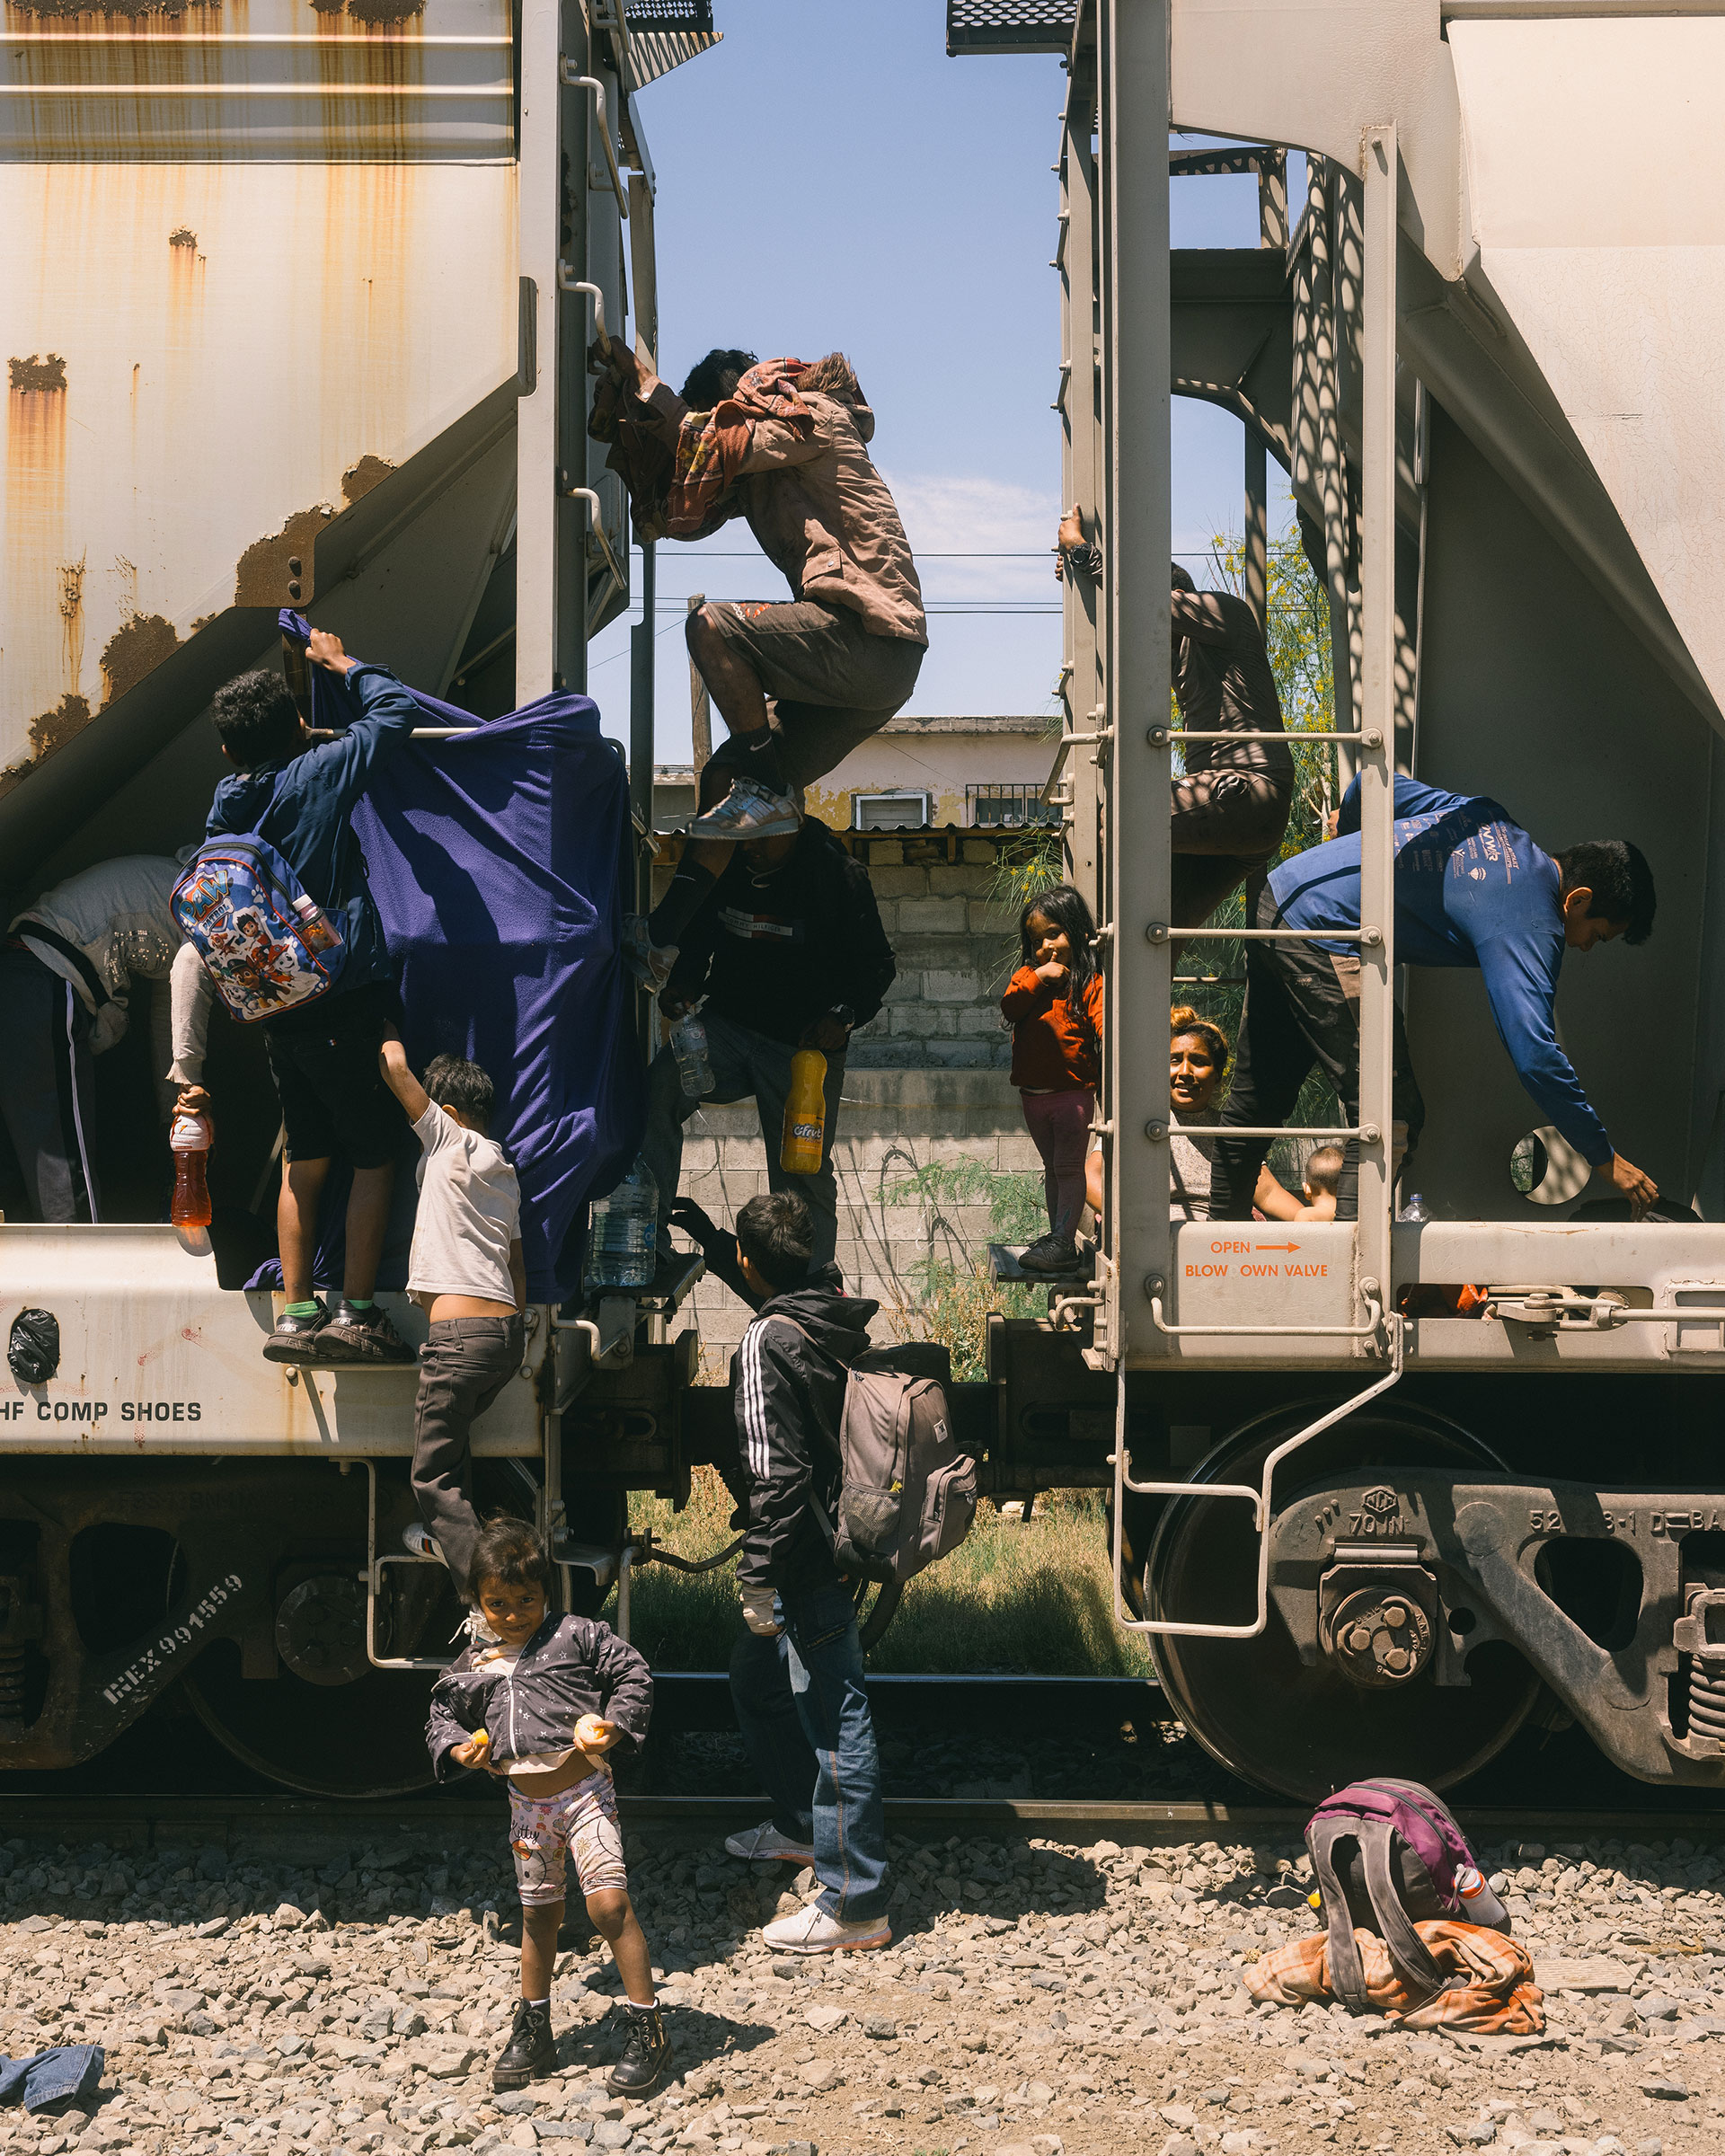 Migrant families from Venezuela disembark from the train known as ‘La Bestia,’ finally arriving at the U.S. Mexico border in Ciudad Juarez after months of travel, on May 16.